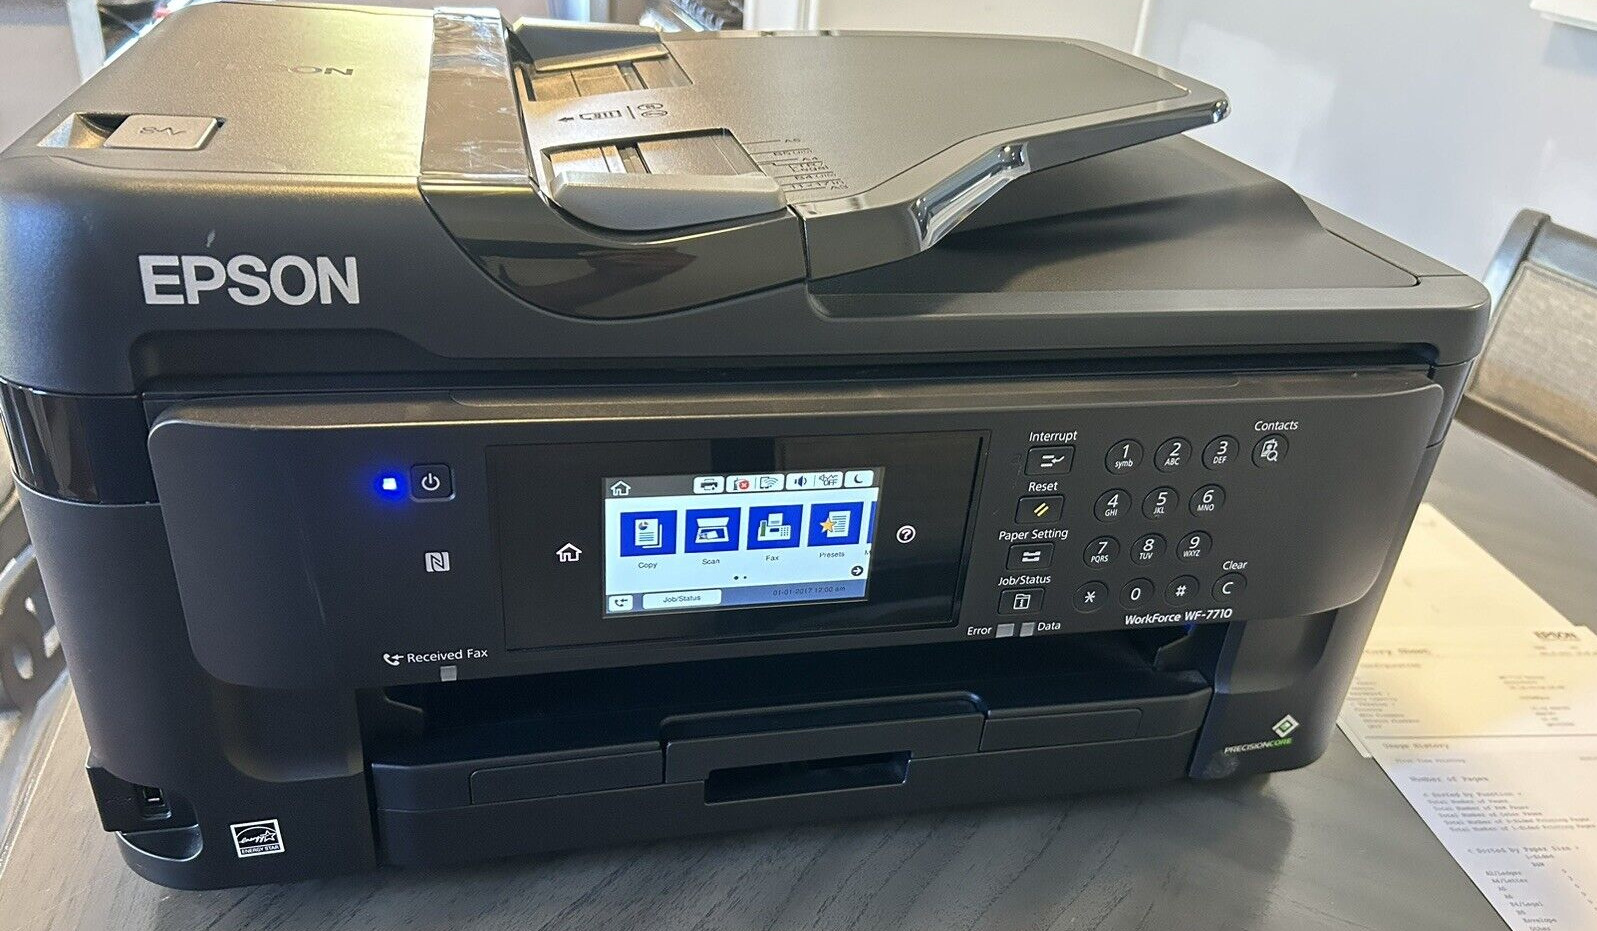 Epson WorkForce WF-7710 All-in-One Inkjet Printer FULLY TESTED LOW PAGE COUNT